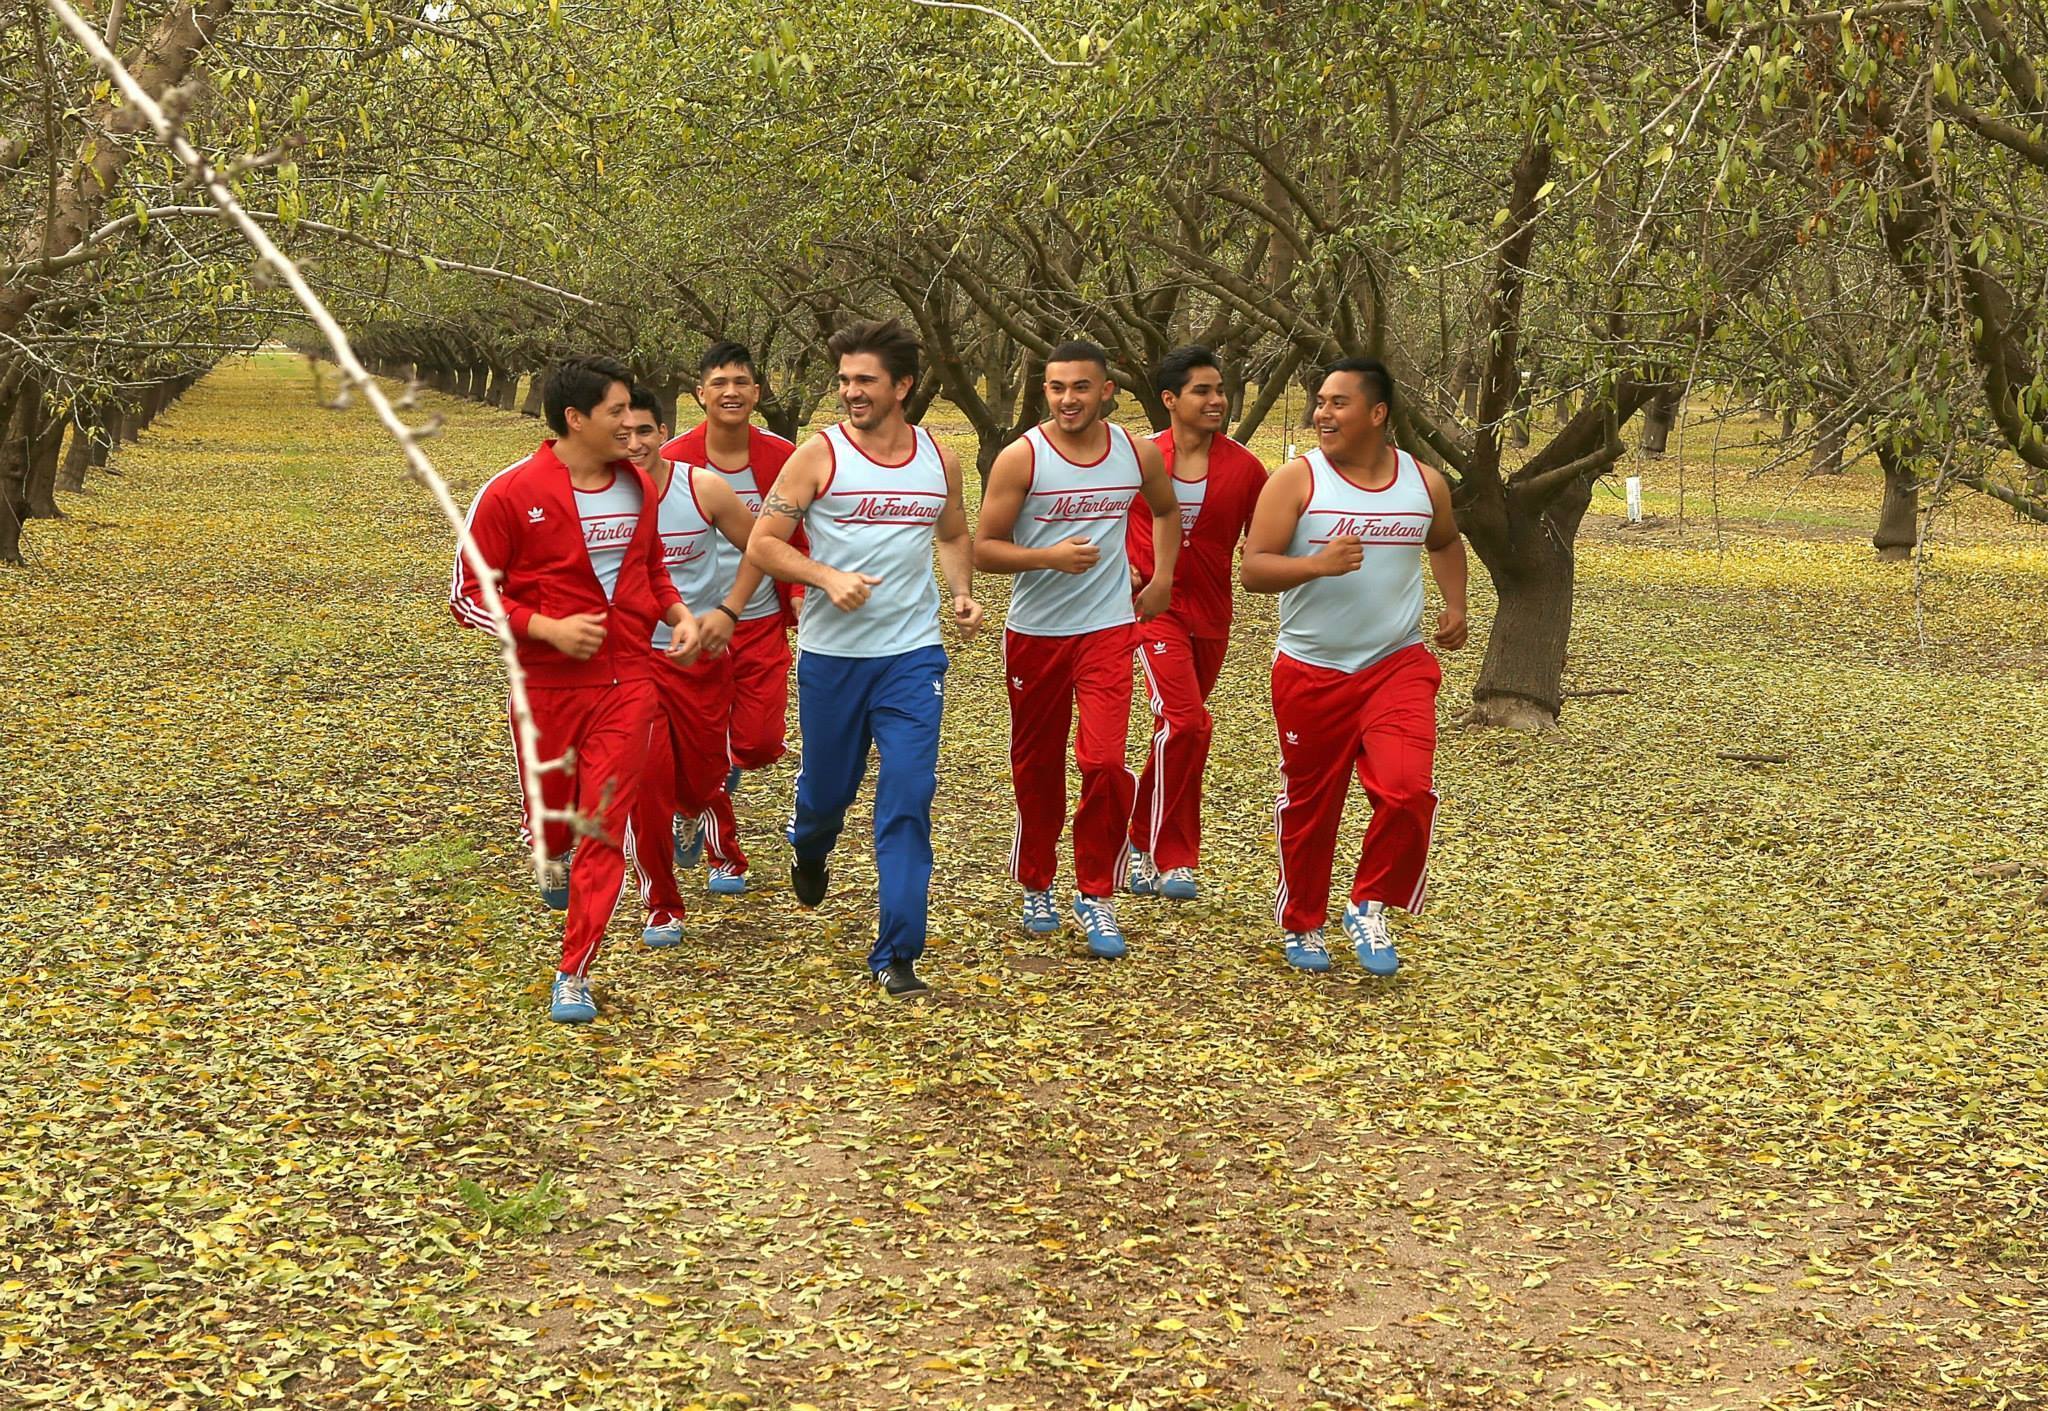 Group of teenagers jogging in "McFarland, USA"